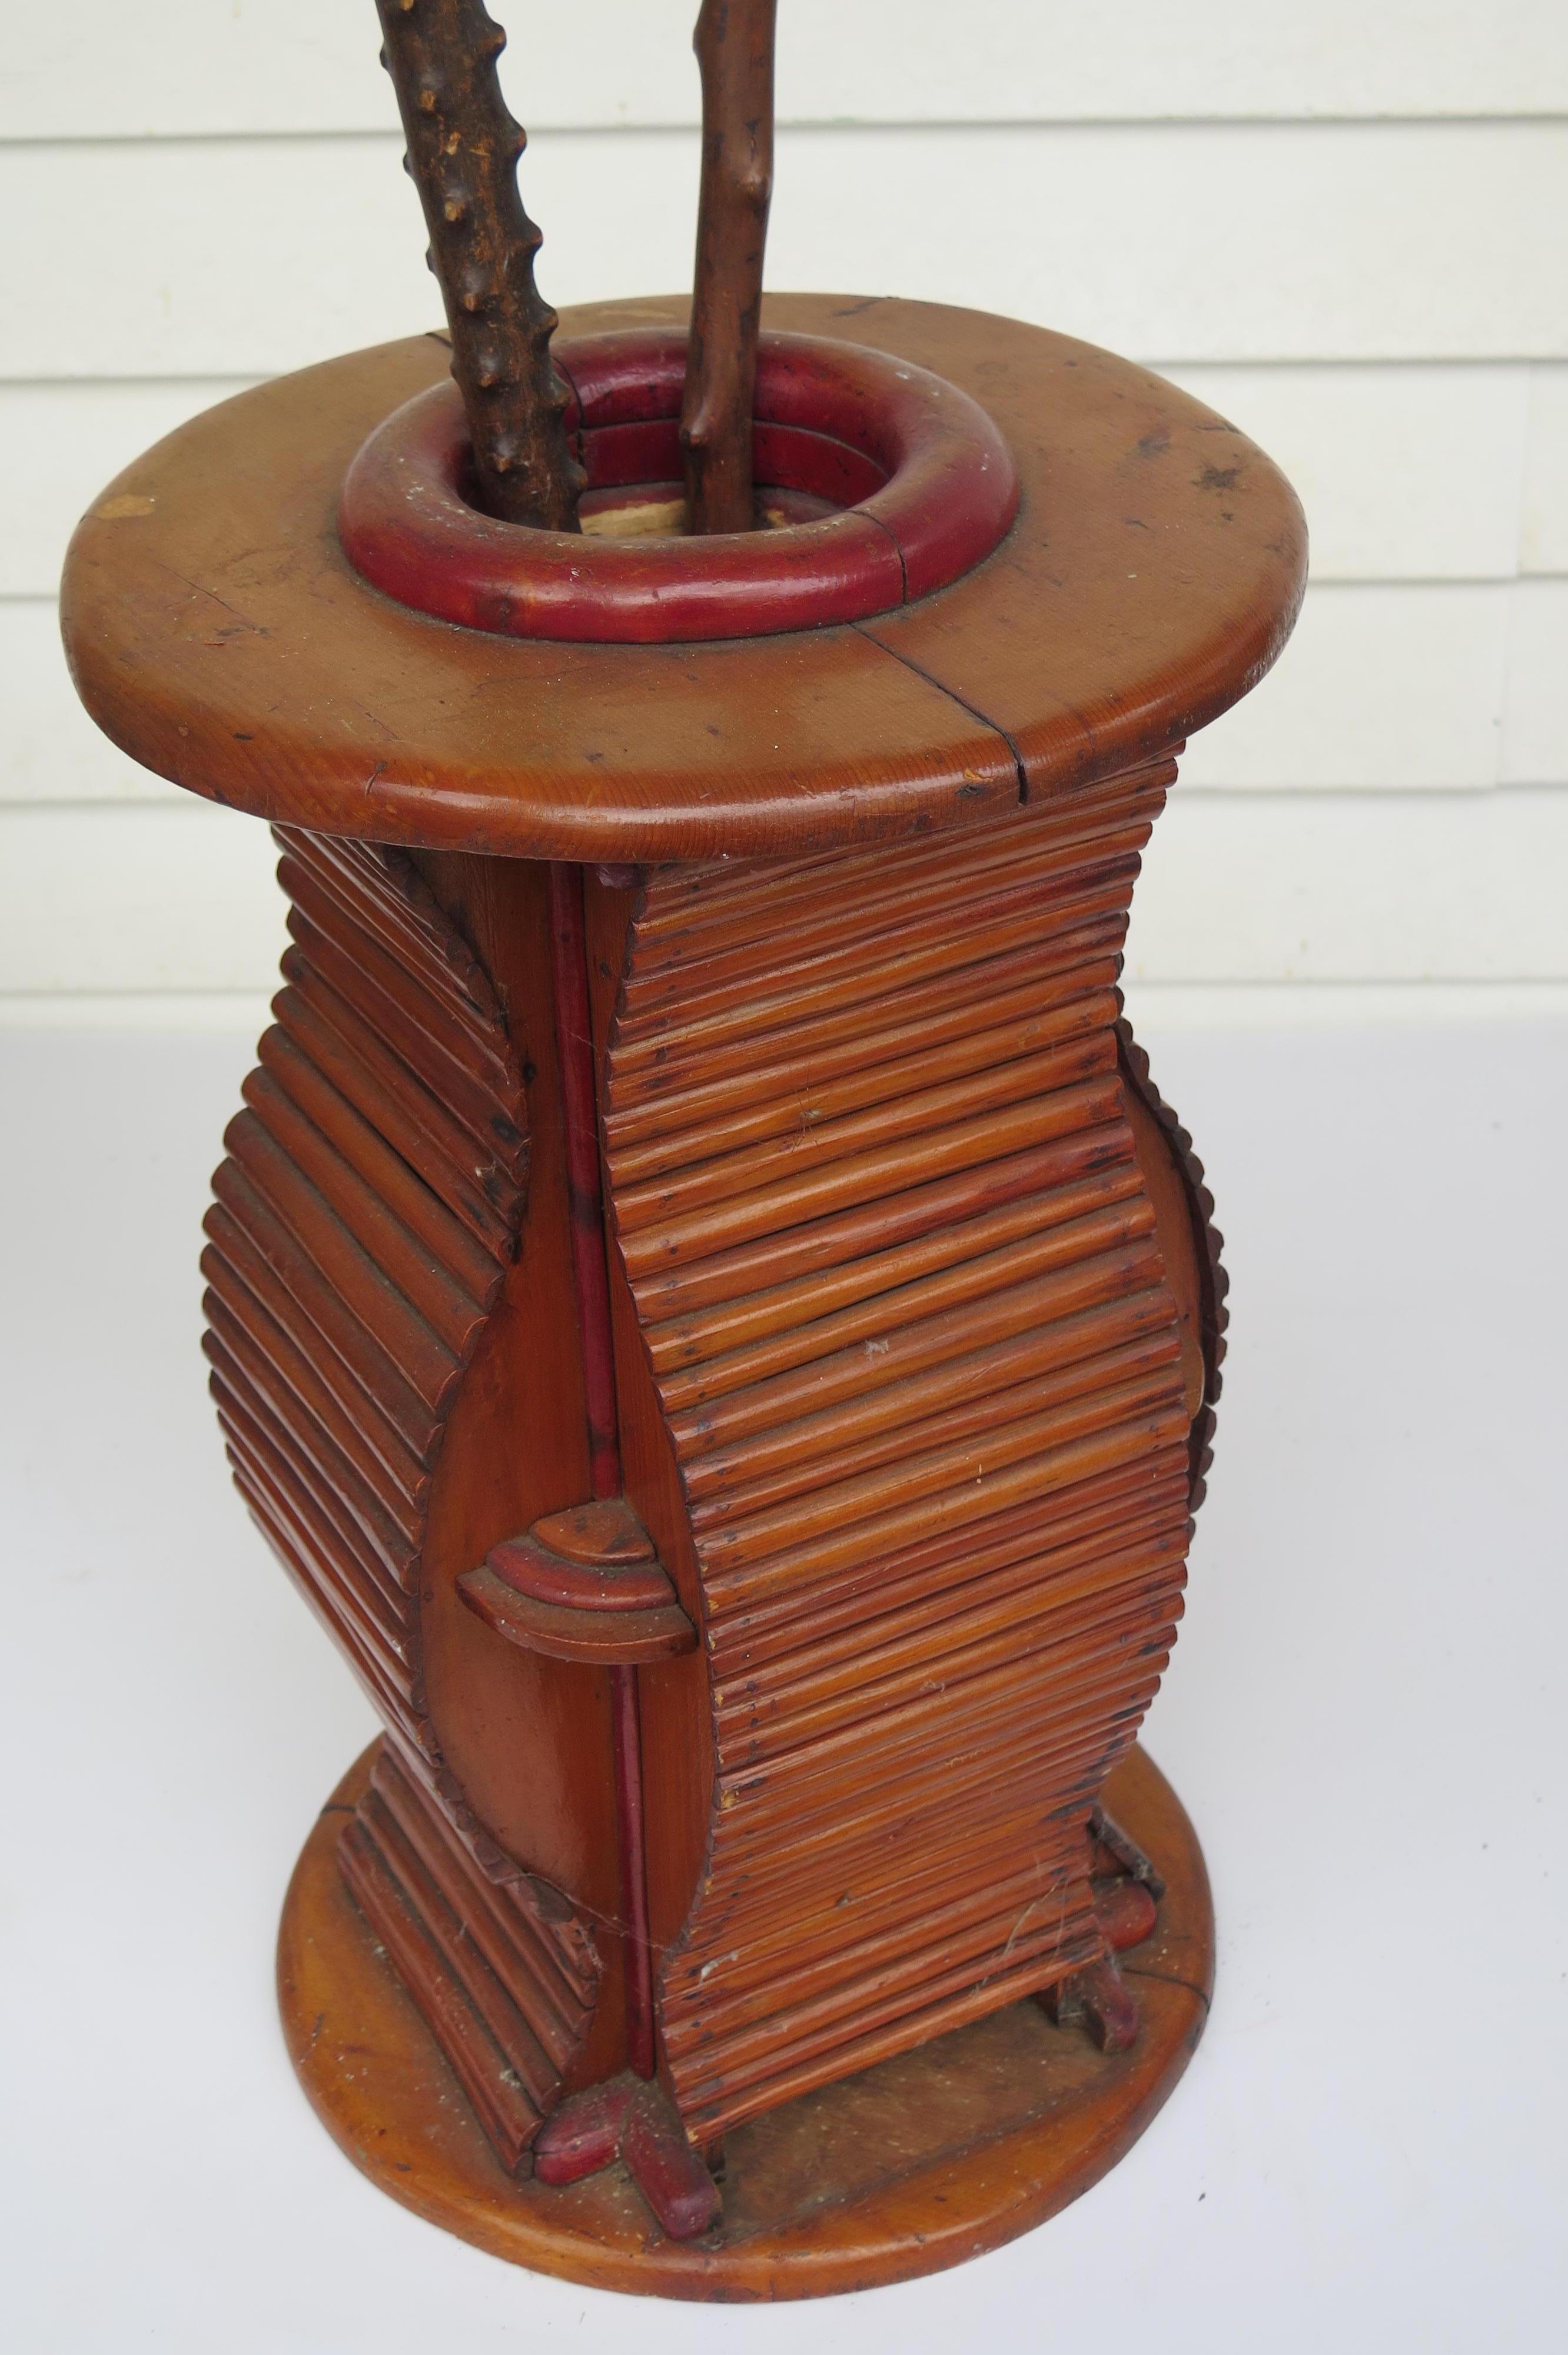 Deco period cane stand of pieced wood. Undulating form on 4 sides of half round wood with quarter discs between the sides. 
Red stained ring opening on larger disc top and disc bottom. The lightly stained wood has a varnish coat finish.